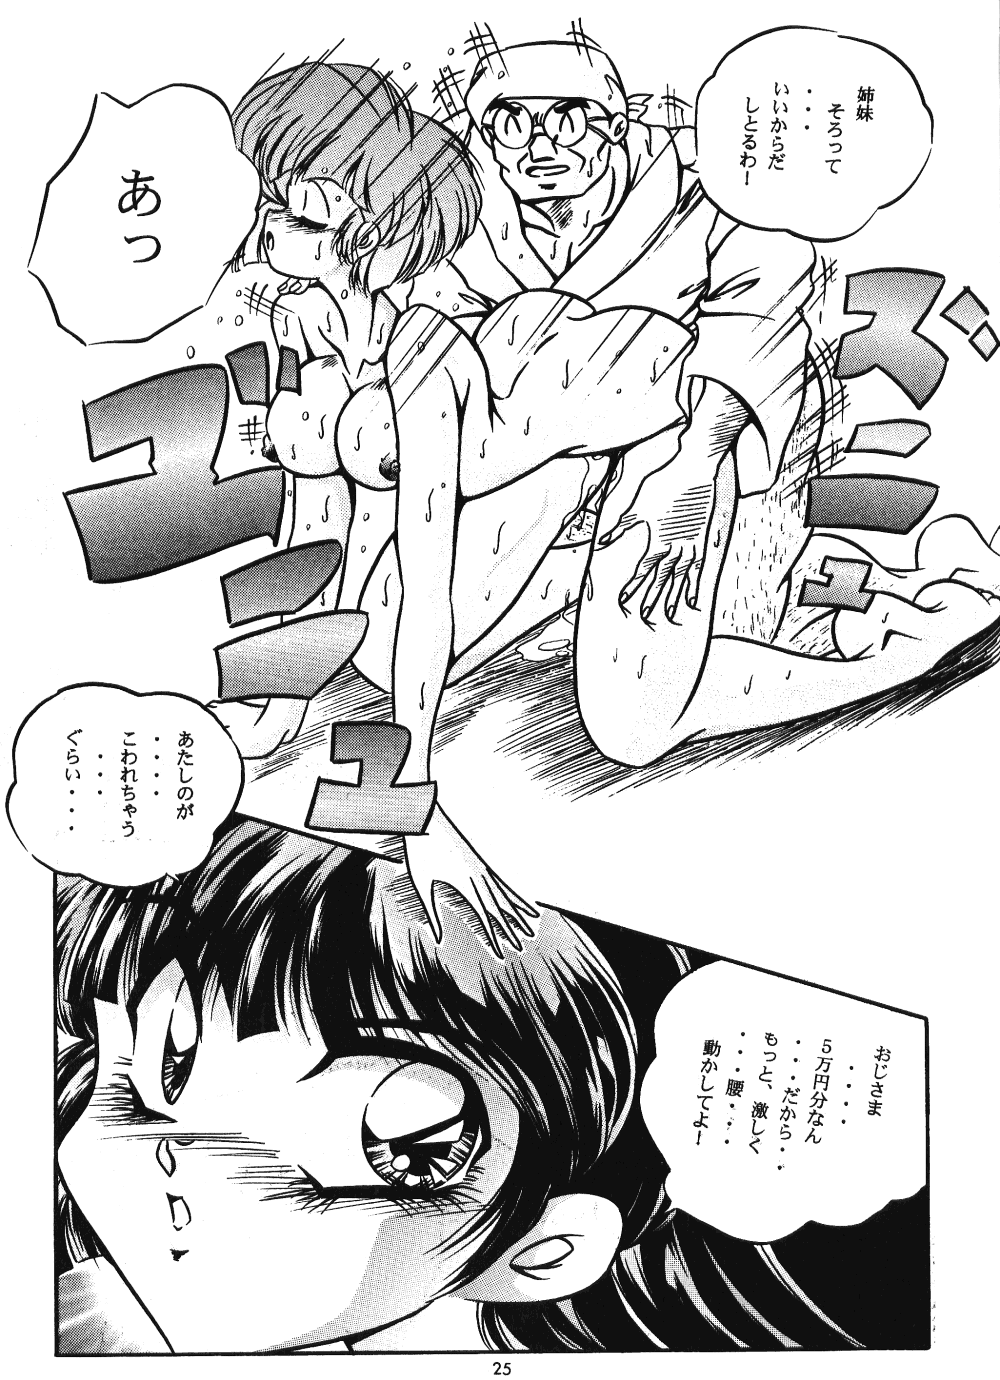 [C-COMPANY] C-COMPANY SPECIAL STAGE 18 (Ranma 1/2, Idol Project) page 26 full